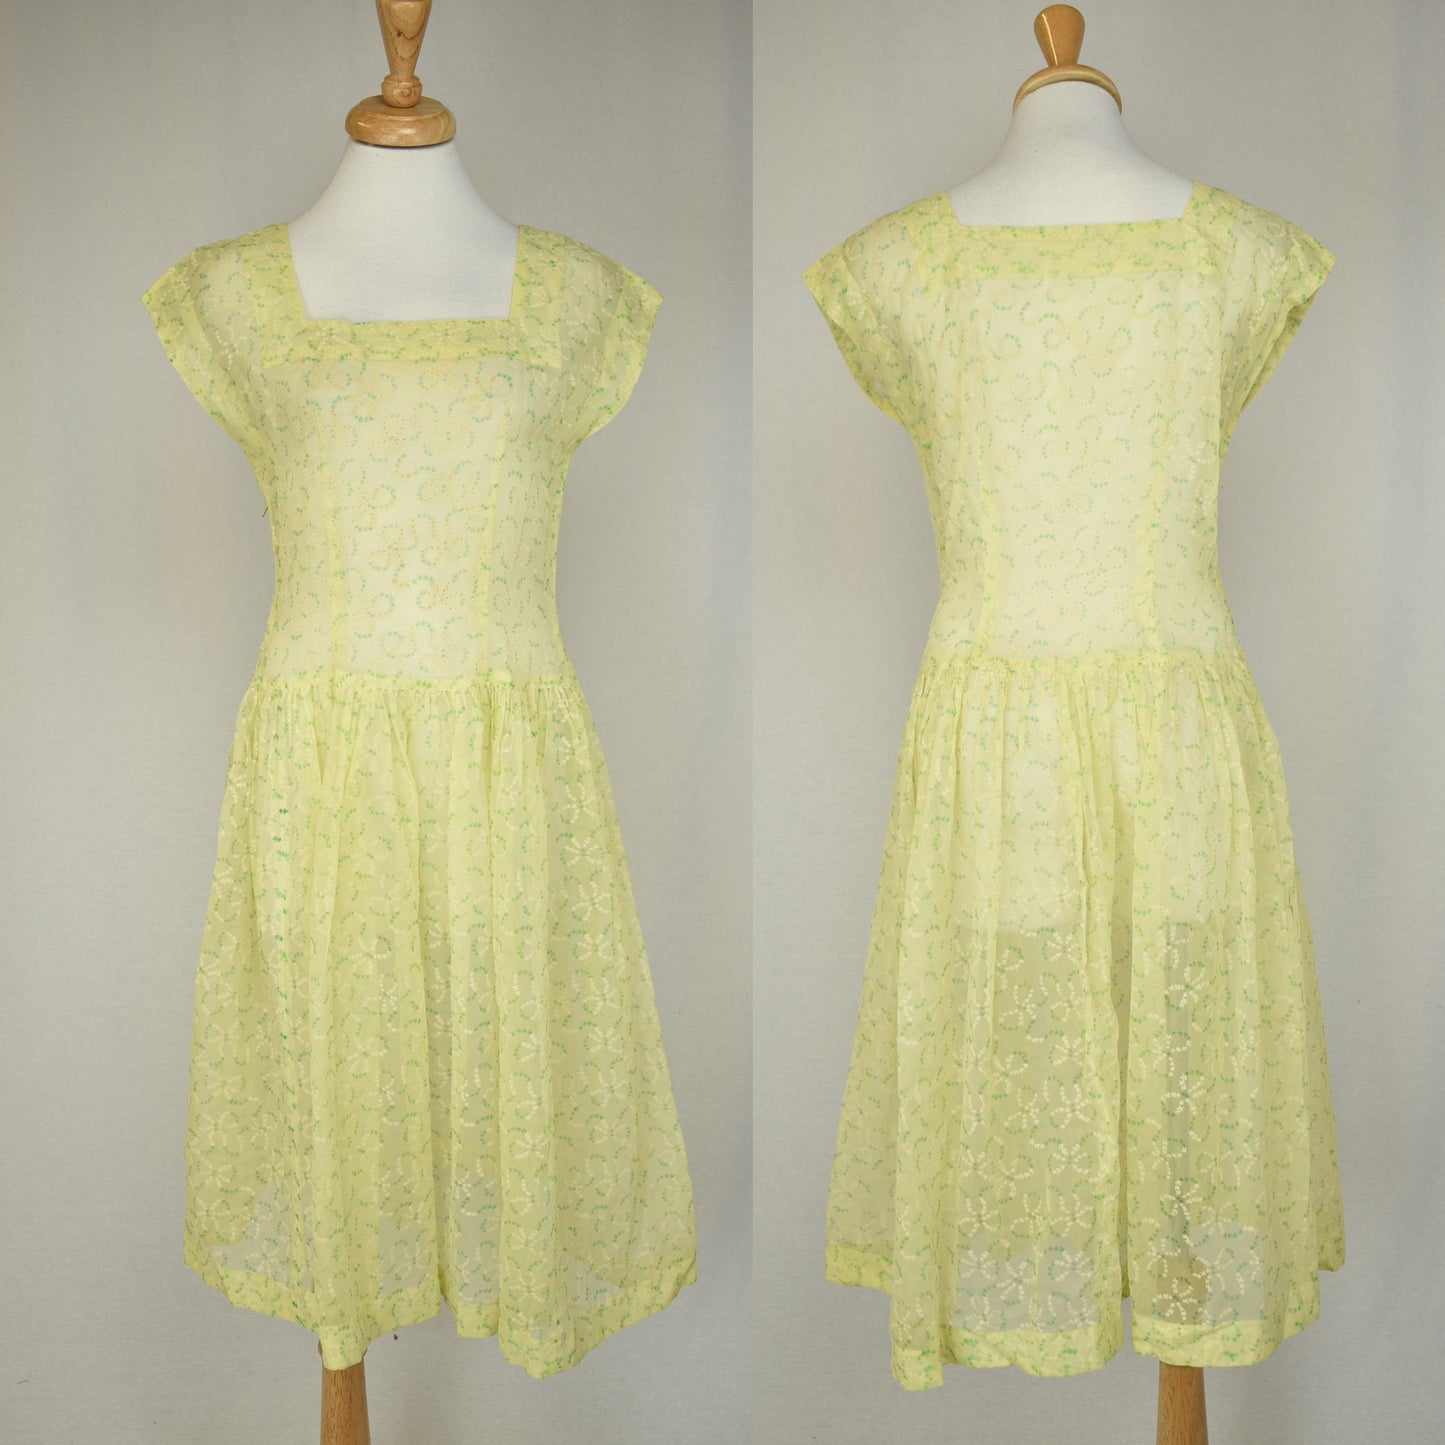 Vintage 50s Sheer Chiffon with Flocked Floral Dress in Lemon Yellow - Side Talon Zip